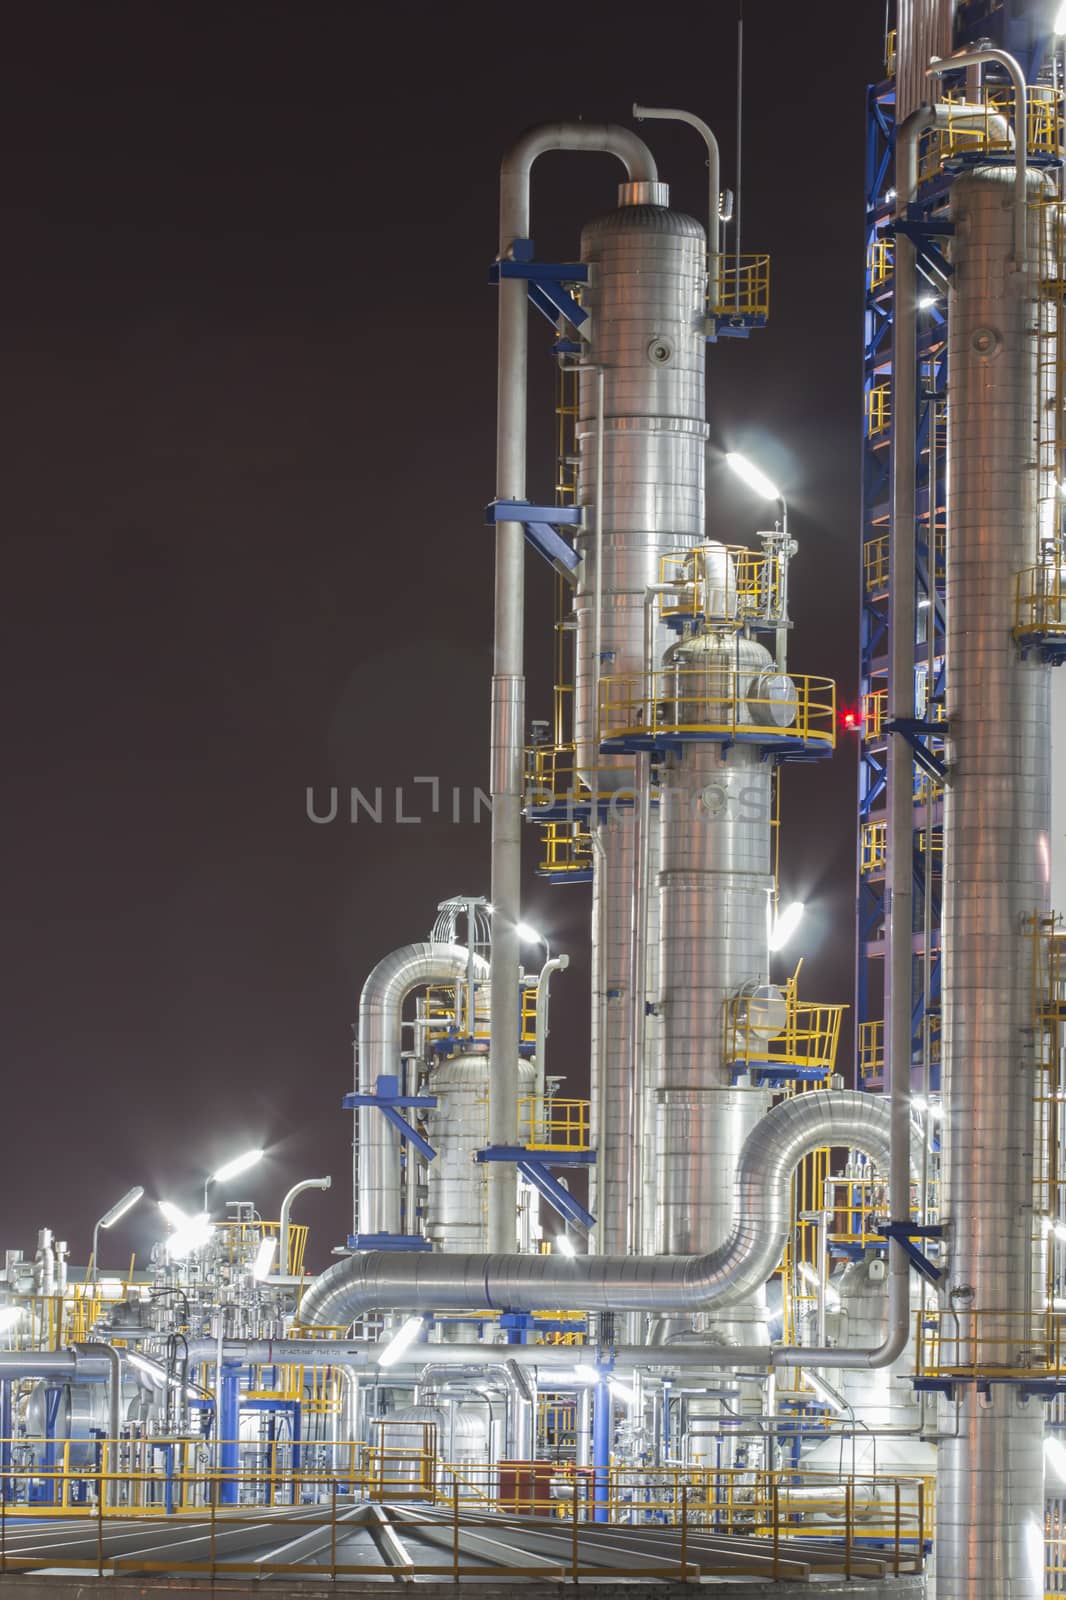 Petroleum plant in night time